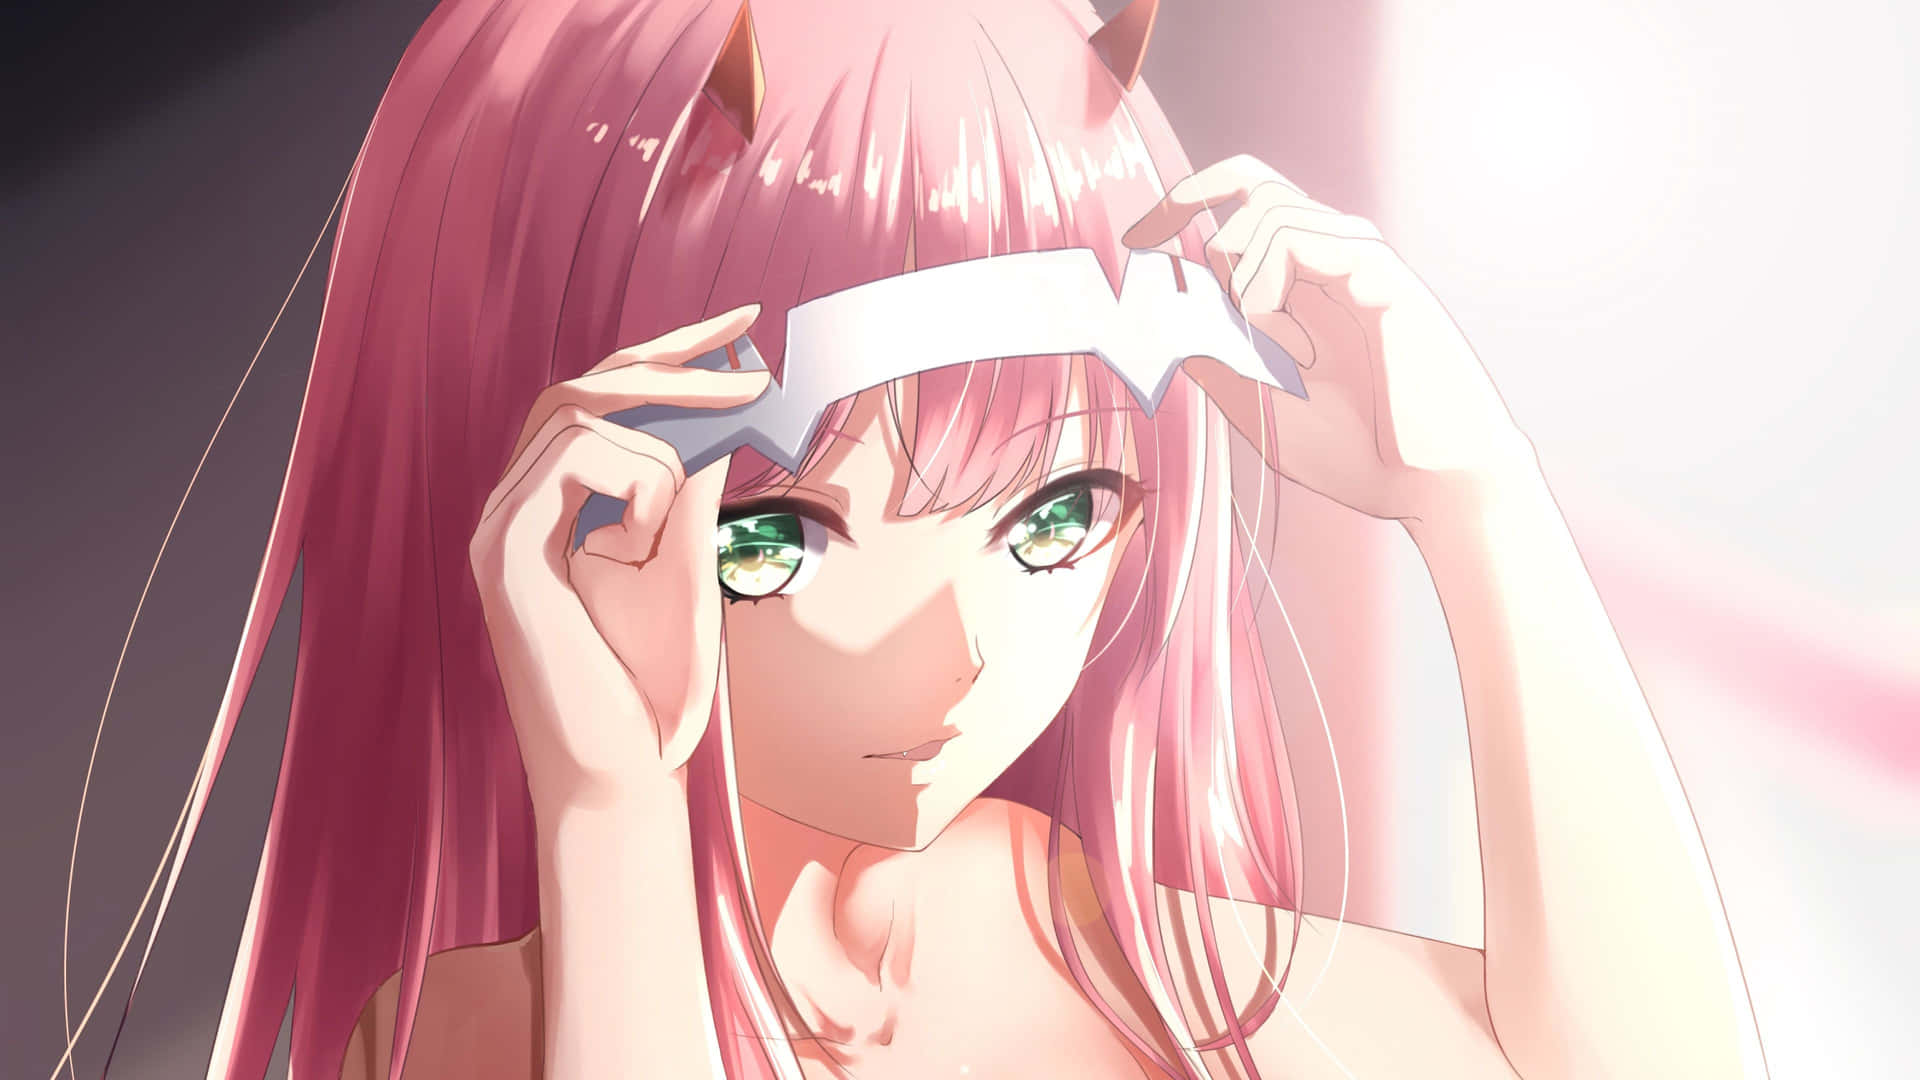 Picture Of Zero Two, An Enigmatic Android With An Aesthetic Beauty. Background